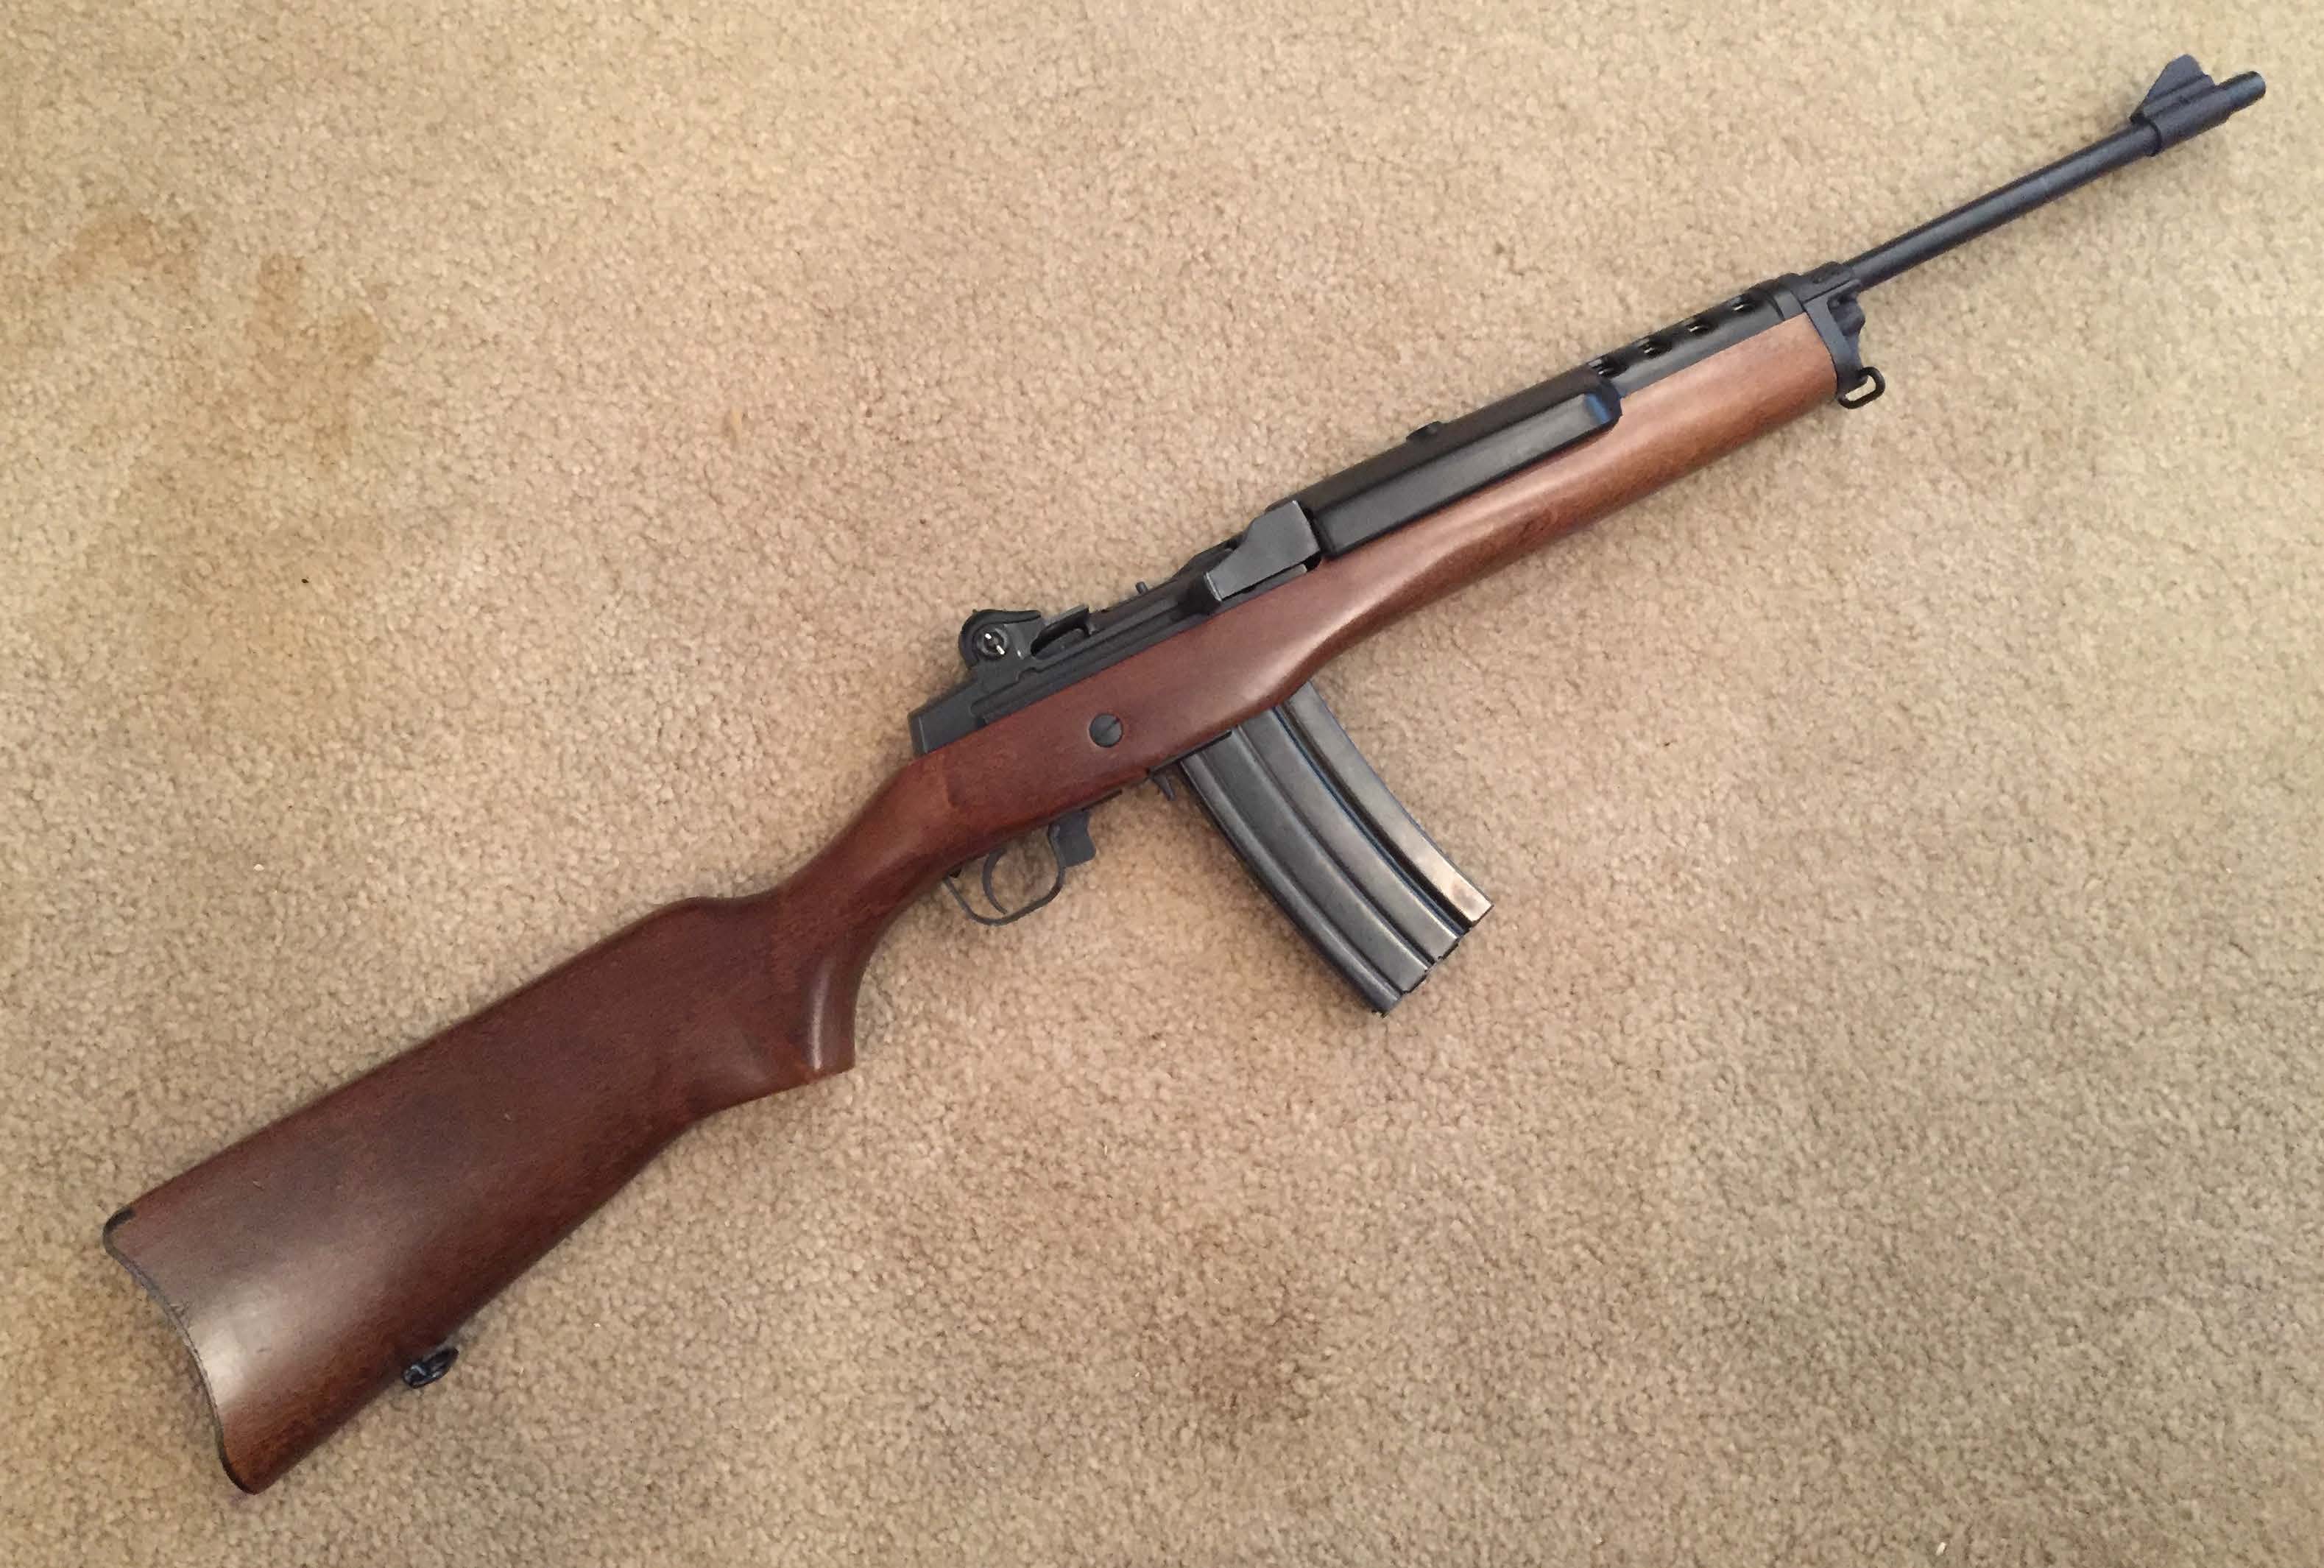 It is a pre-Ranch Rifle design with the pencil barrel and no scope mount pr...